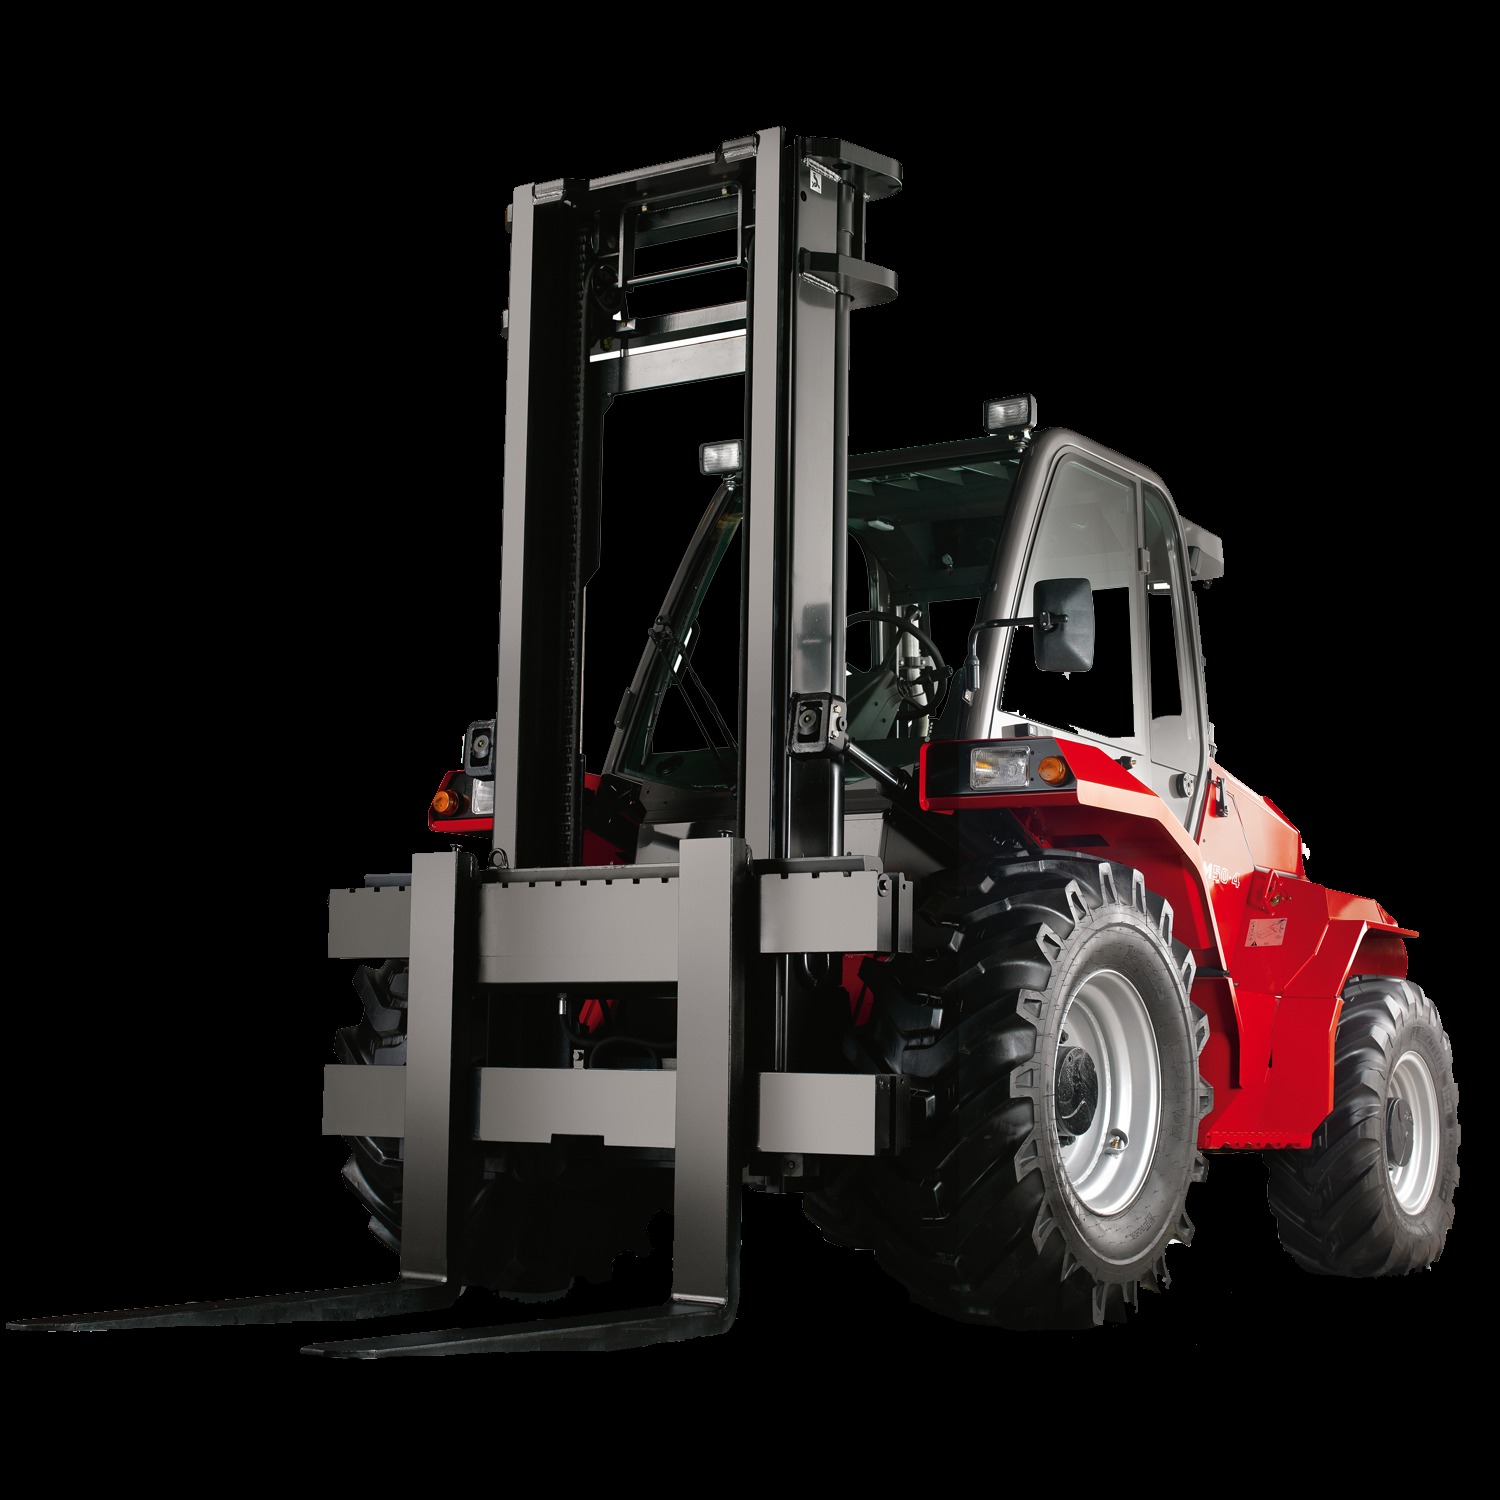 Used 2015 MANITOU M50.4 Rough Terrain Forklift for sale in Kitimat British Columbia